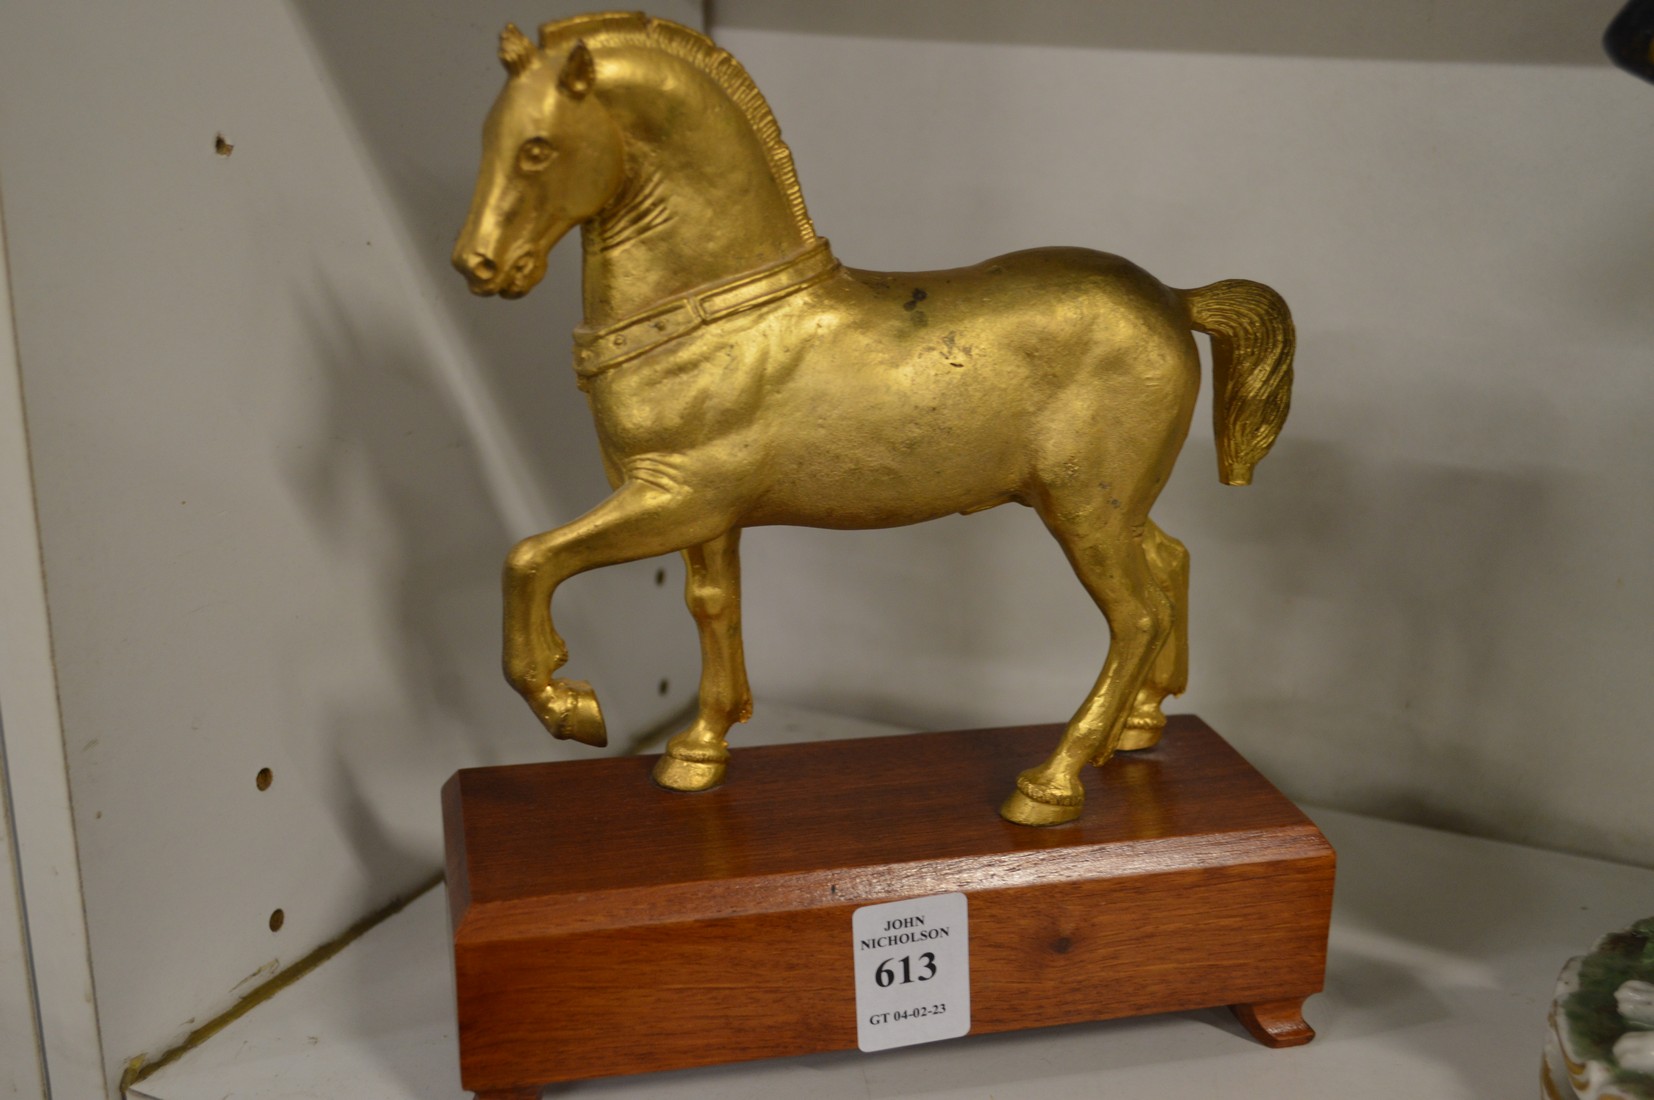 A gilded bronze model of a prancing horse on a wooden base.